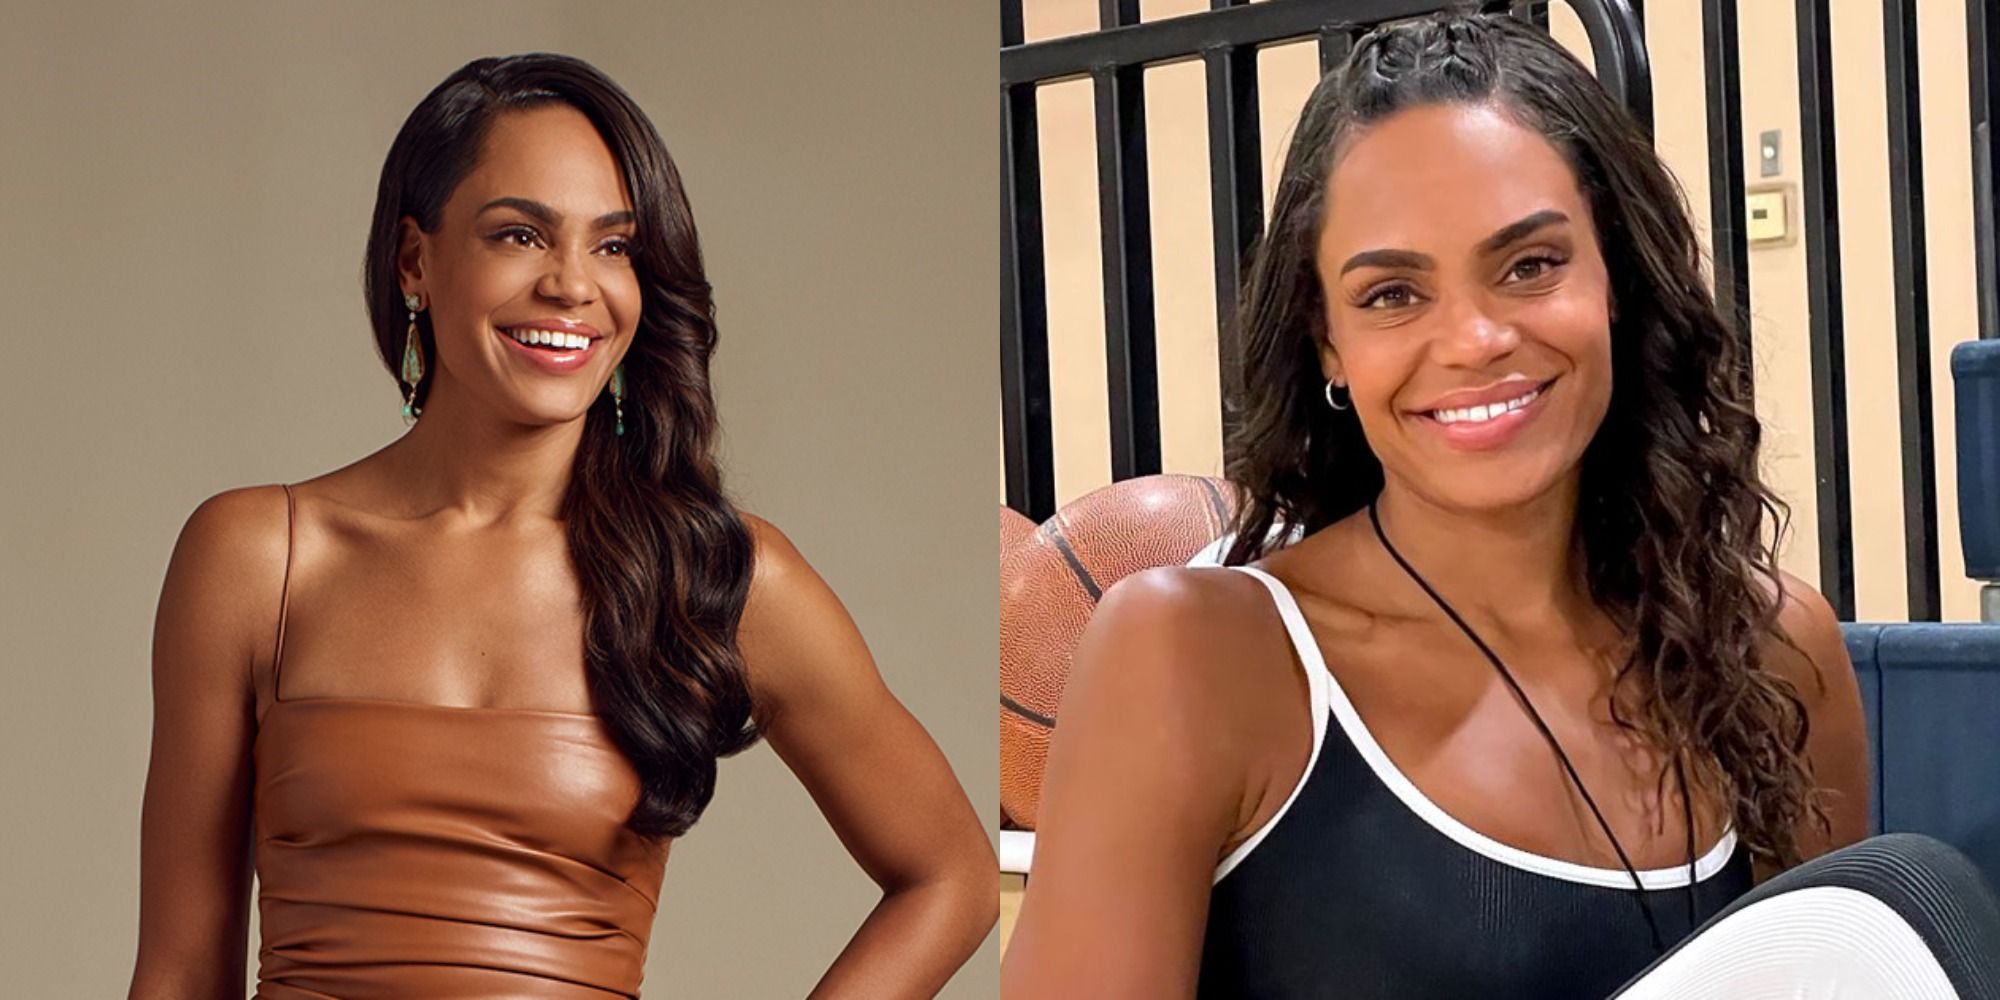 Two side by side images of Michelle Young from The Bachelorette